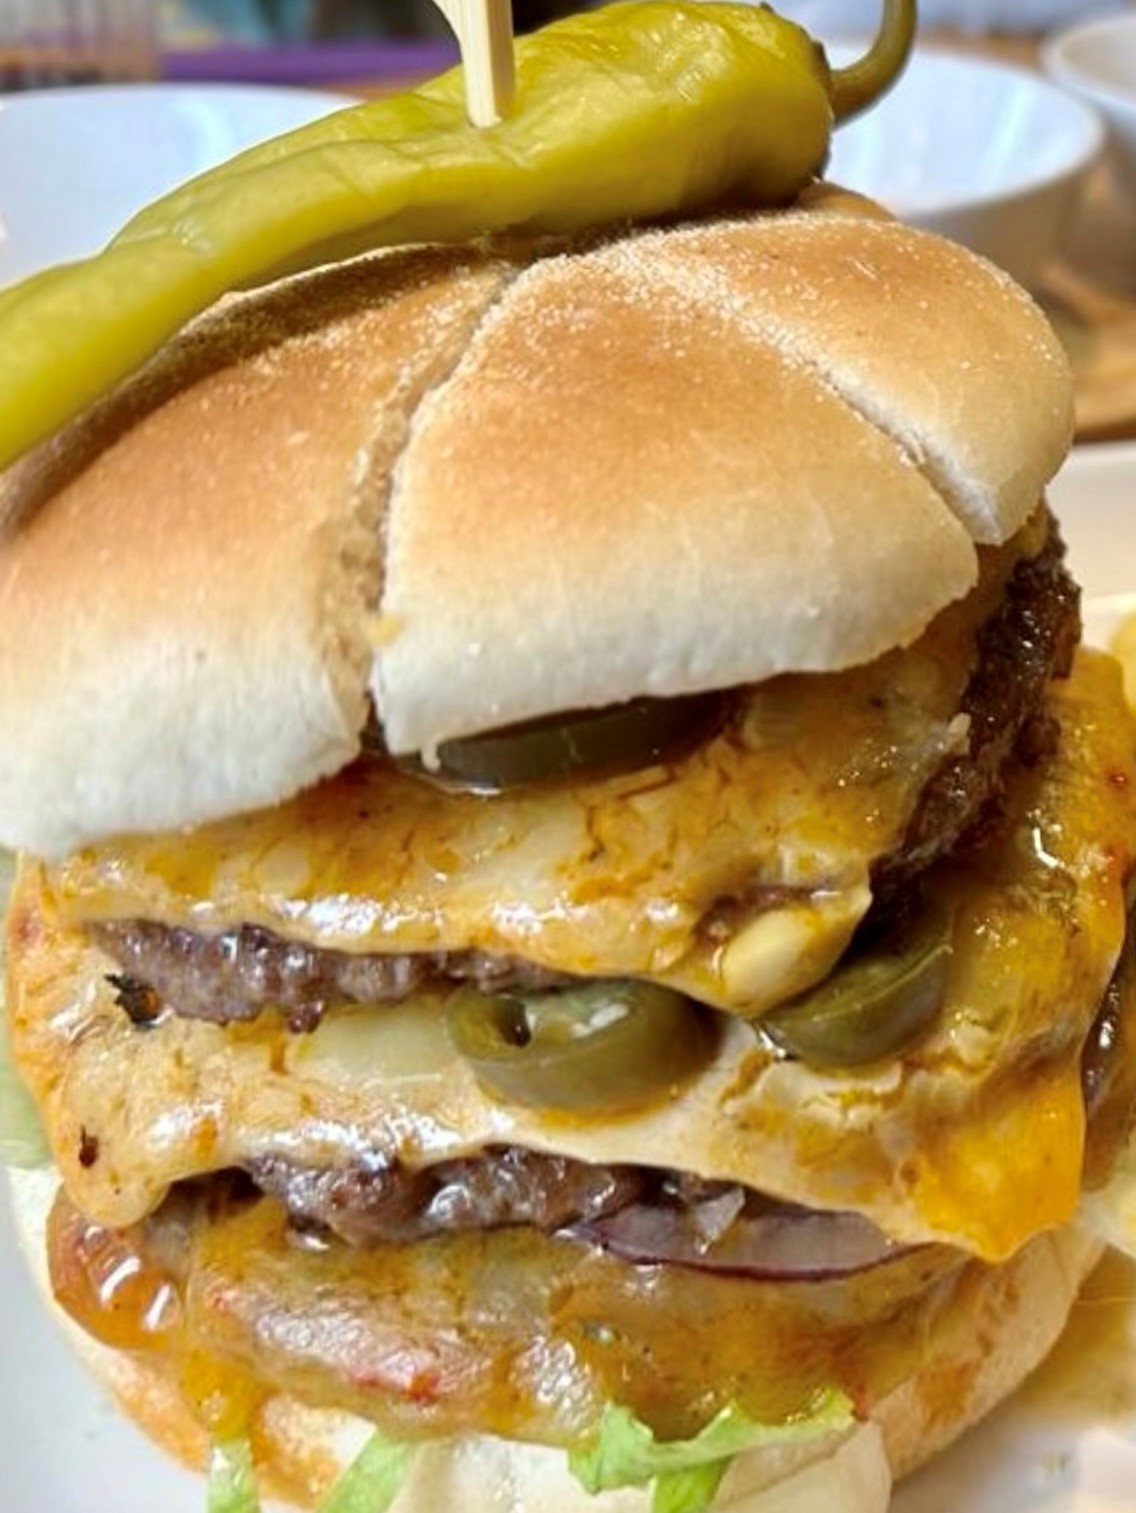 The classic bacon double cheese burger